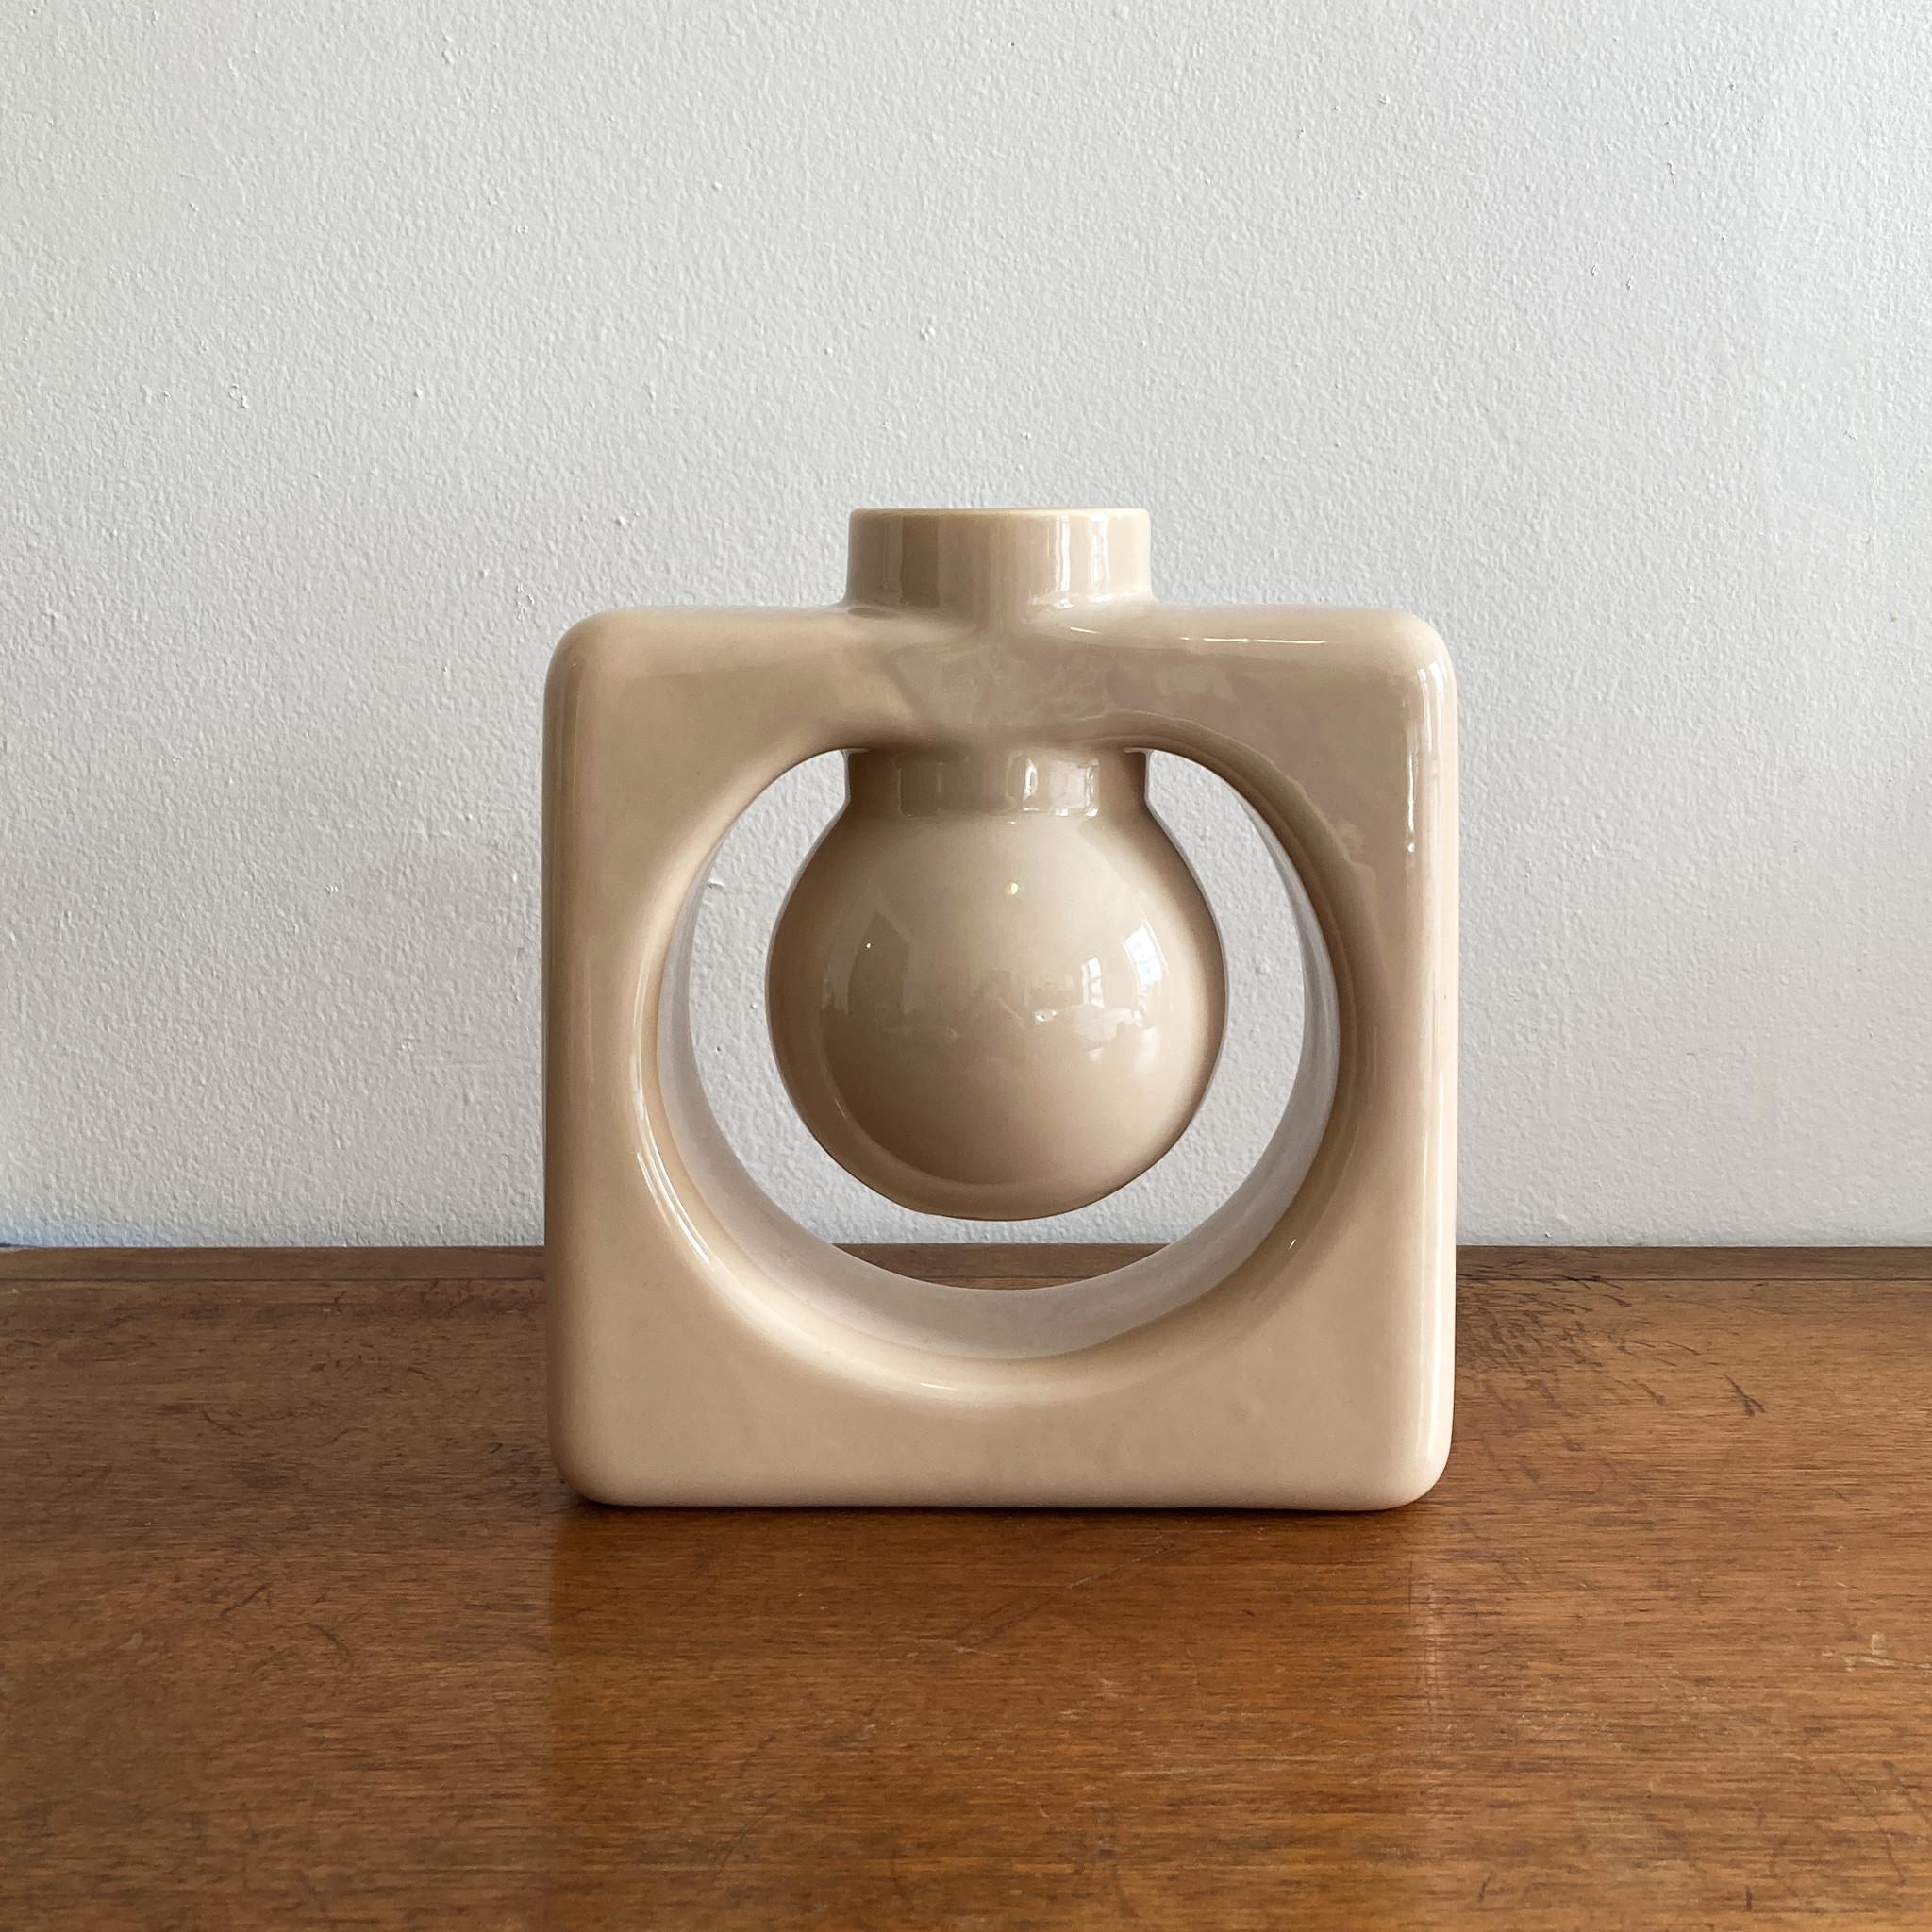 A stunning rare abstract Haeger beige/ ecru vase in midcentury style, medium size. In great condition, no crazing, chips or cracks. This piece coordinates with four other matching vases, listed separately, see photos. Beautiful on its own, or paired